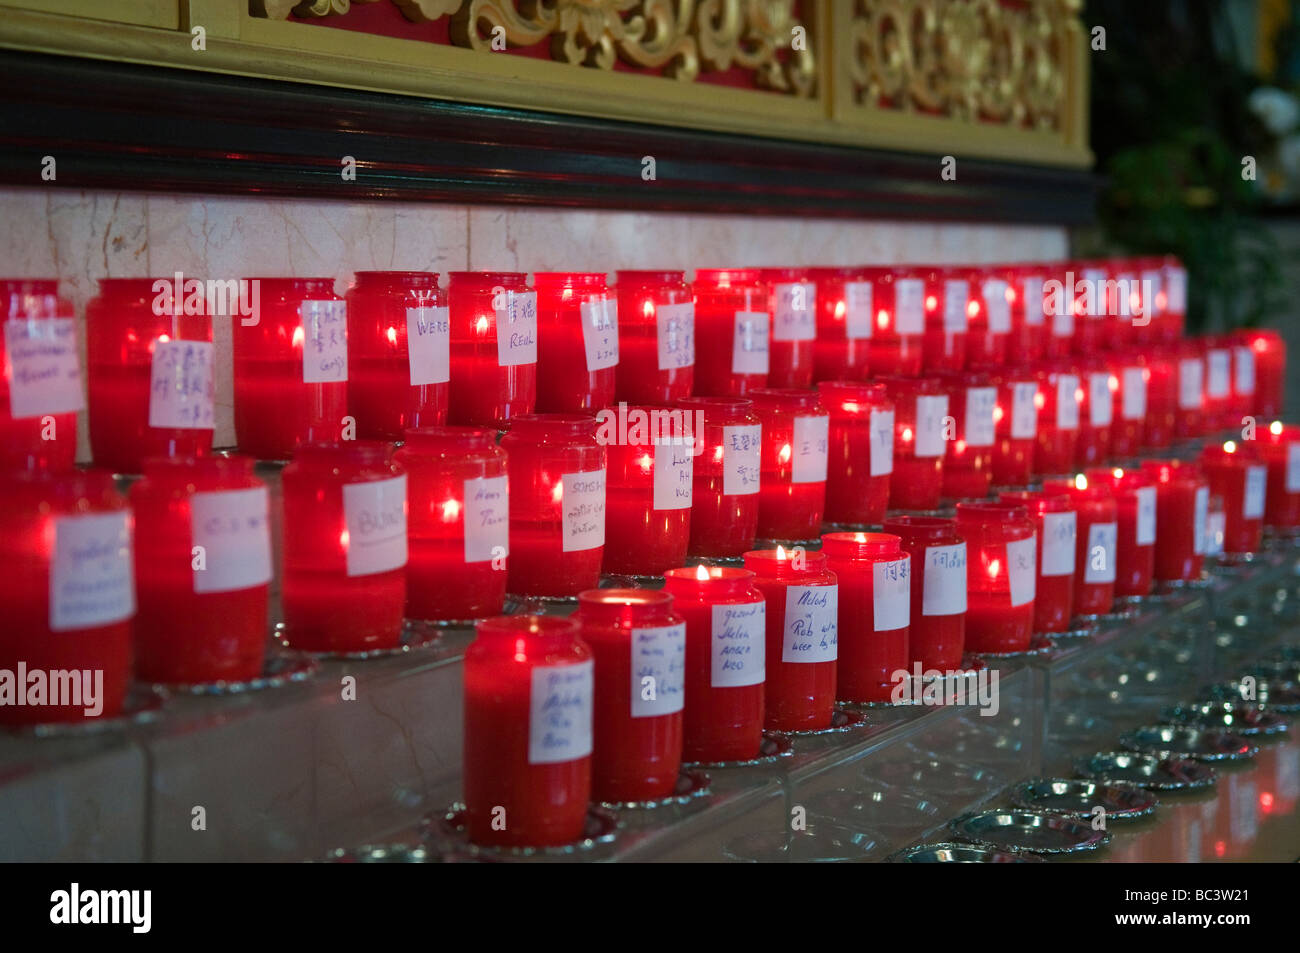 Candles burning at the altar of the Chinese Buddhist Temple, Fo Guang Shan He Hua (Zeedijk Temple), Amsterdam, Netherlands Stock Photo